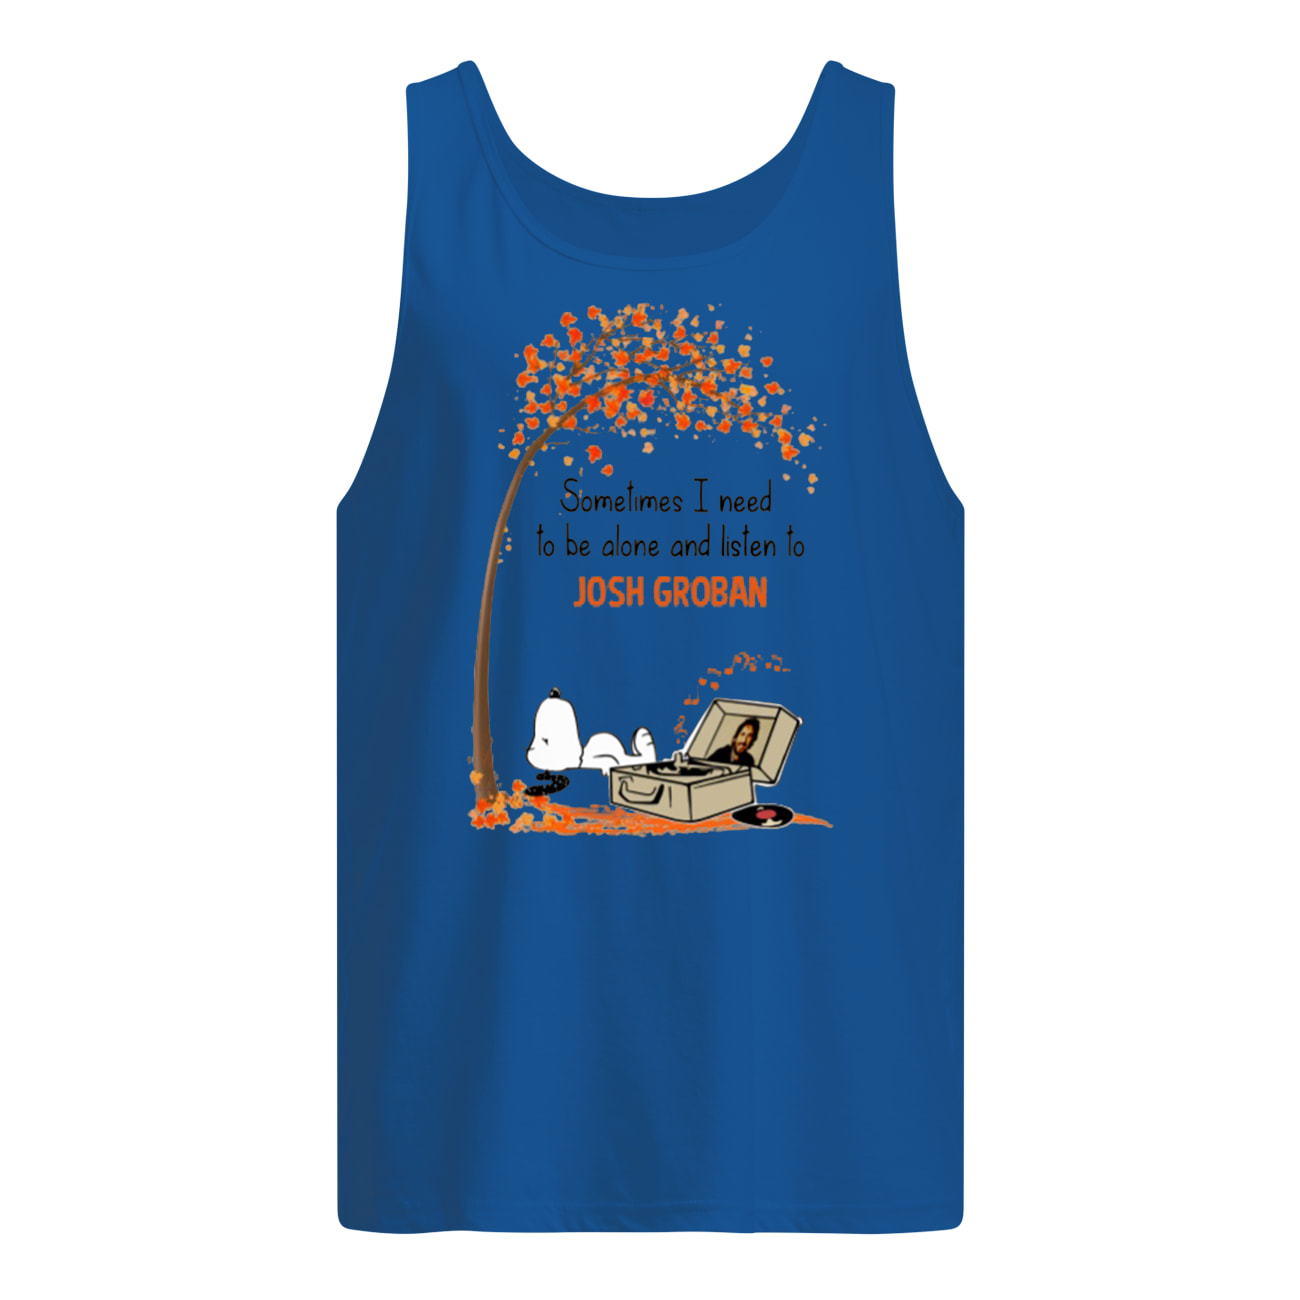 Snoopy sometimes I need to be alone and listen to josh groban tank top